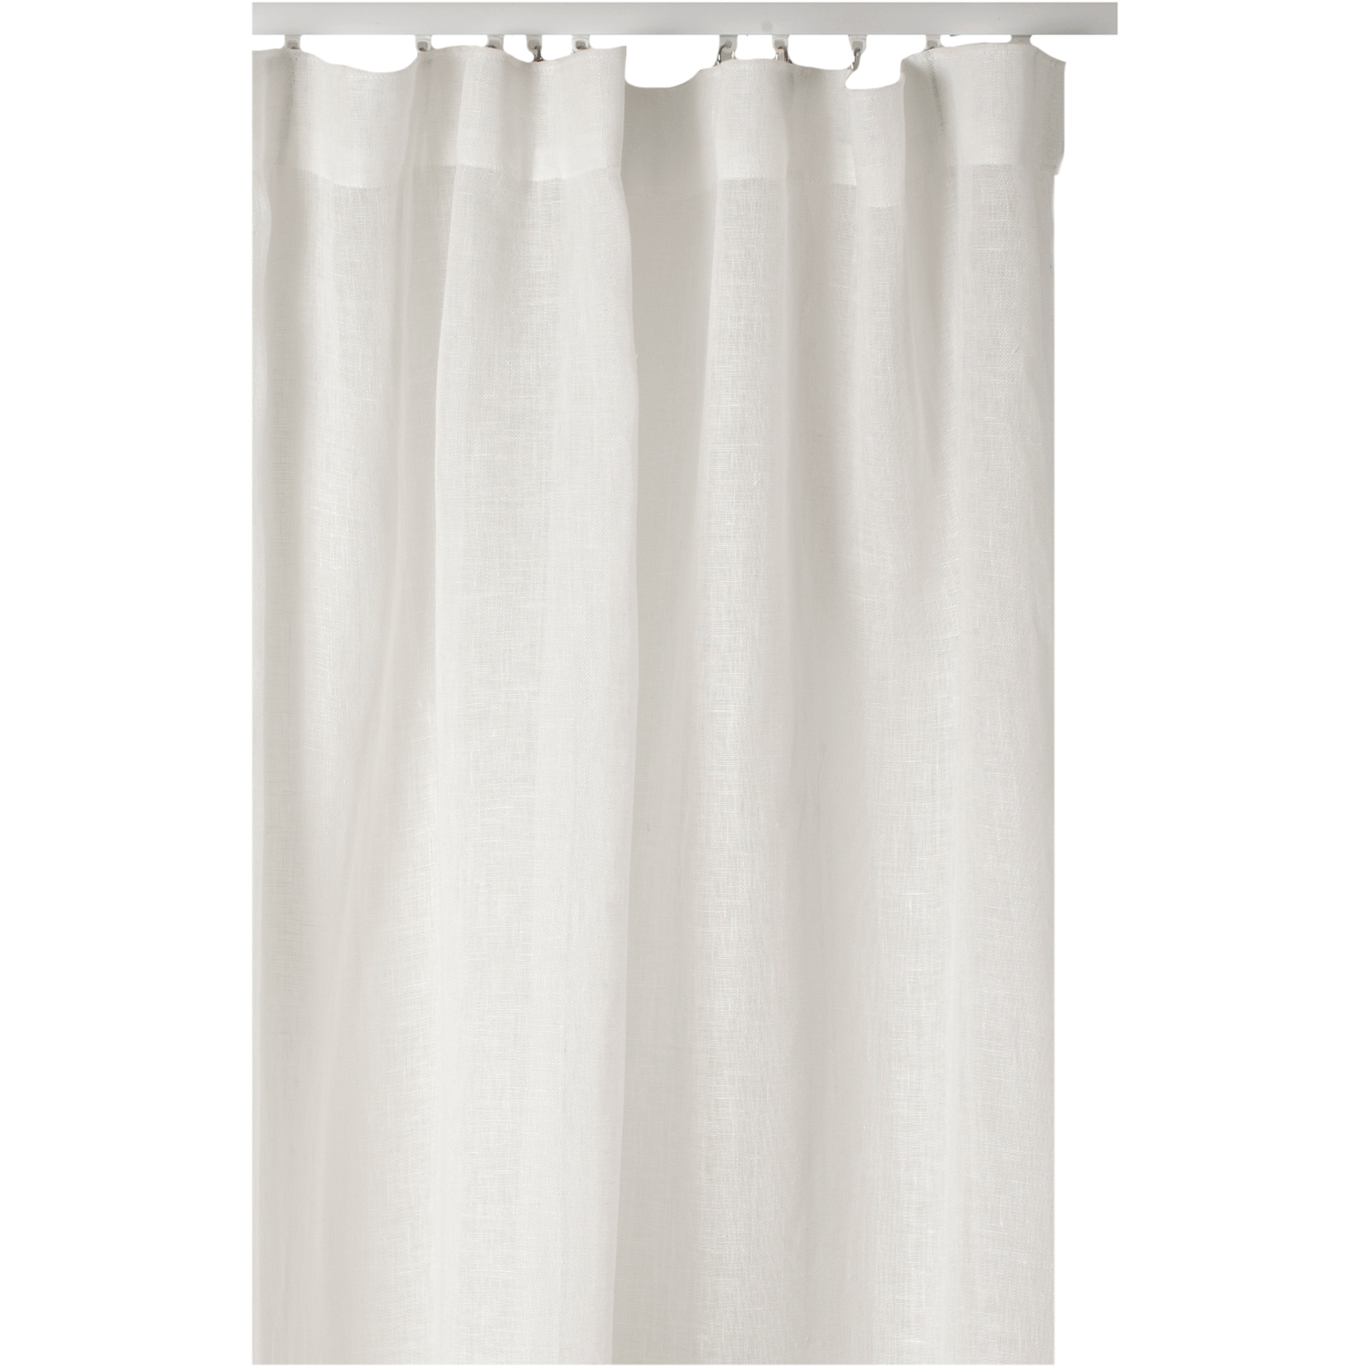 Sirocco Curtain With Heading Tape 135x250 cm, White